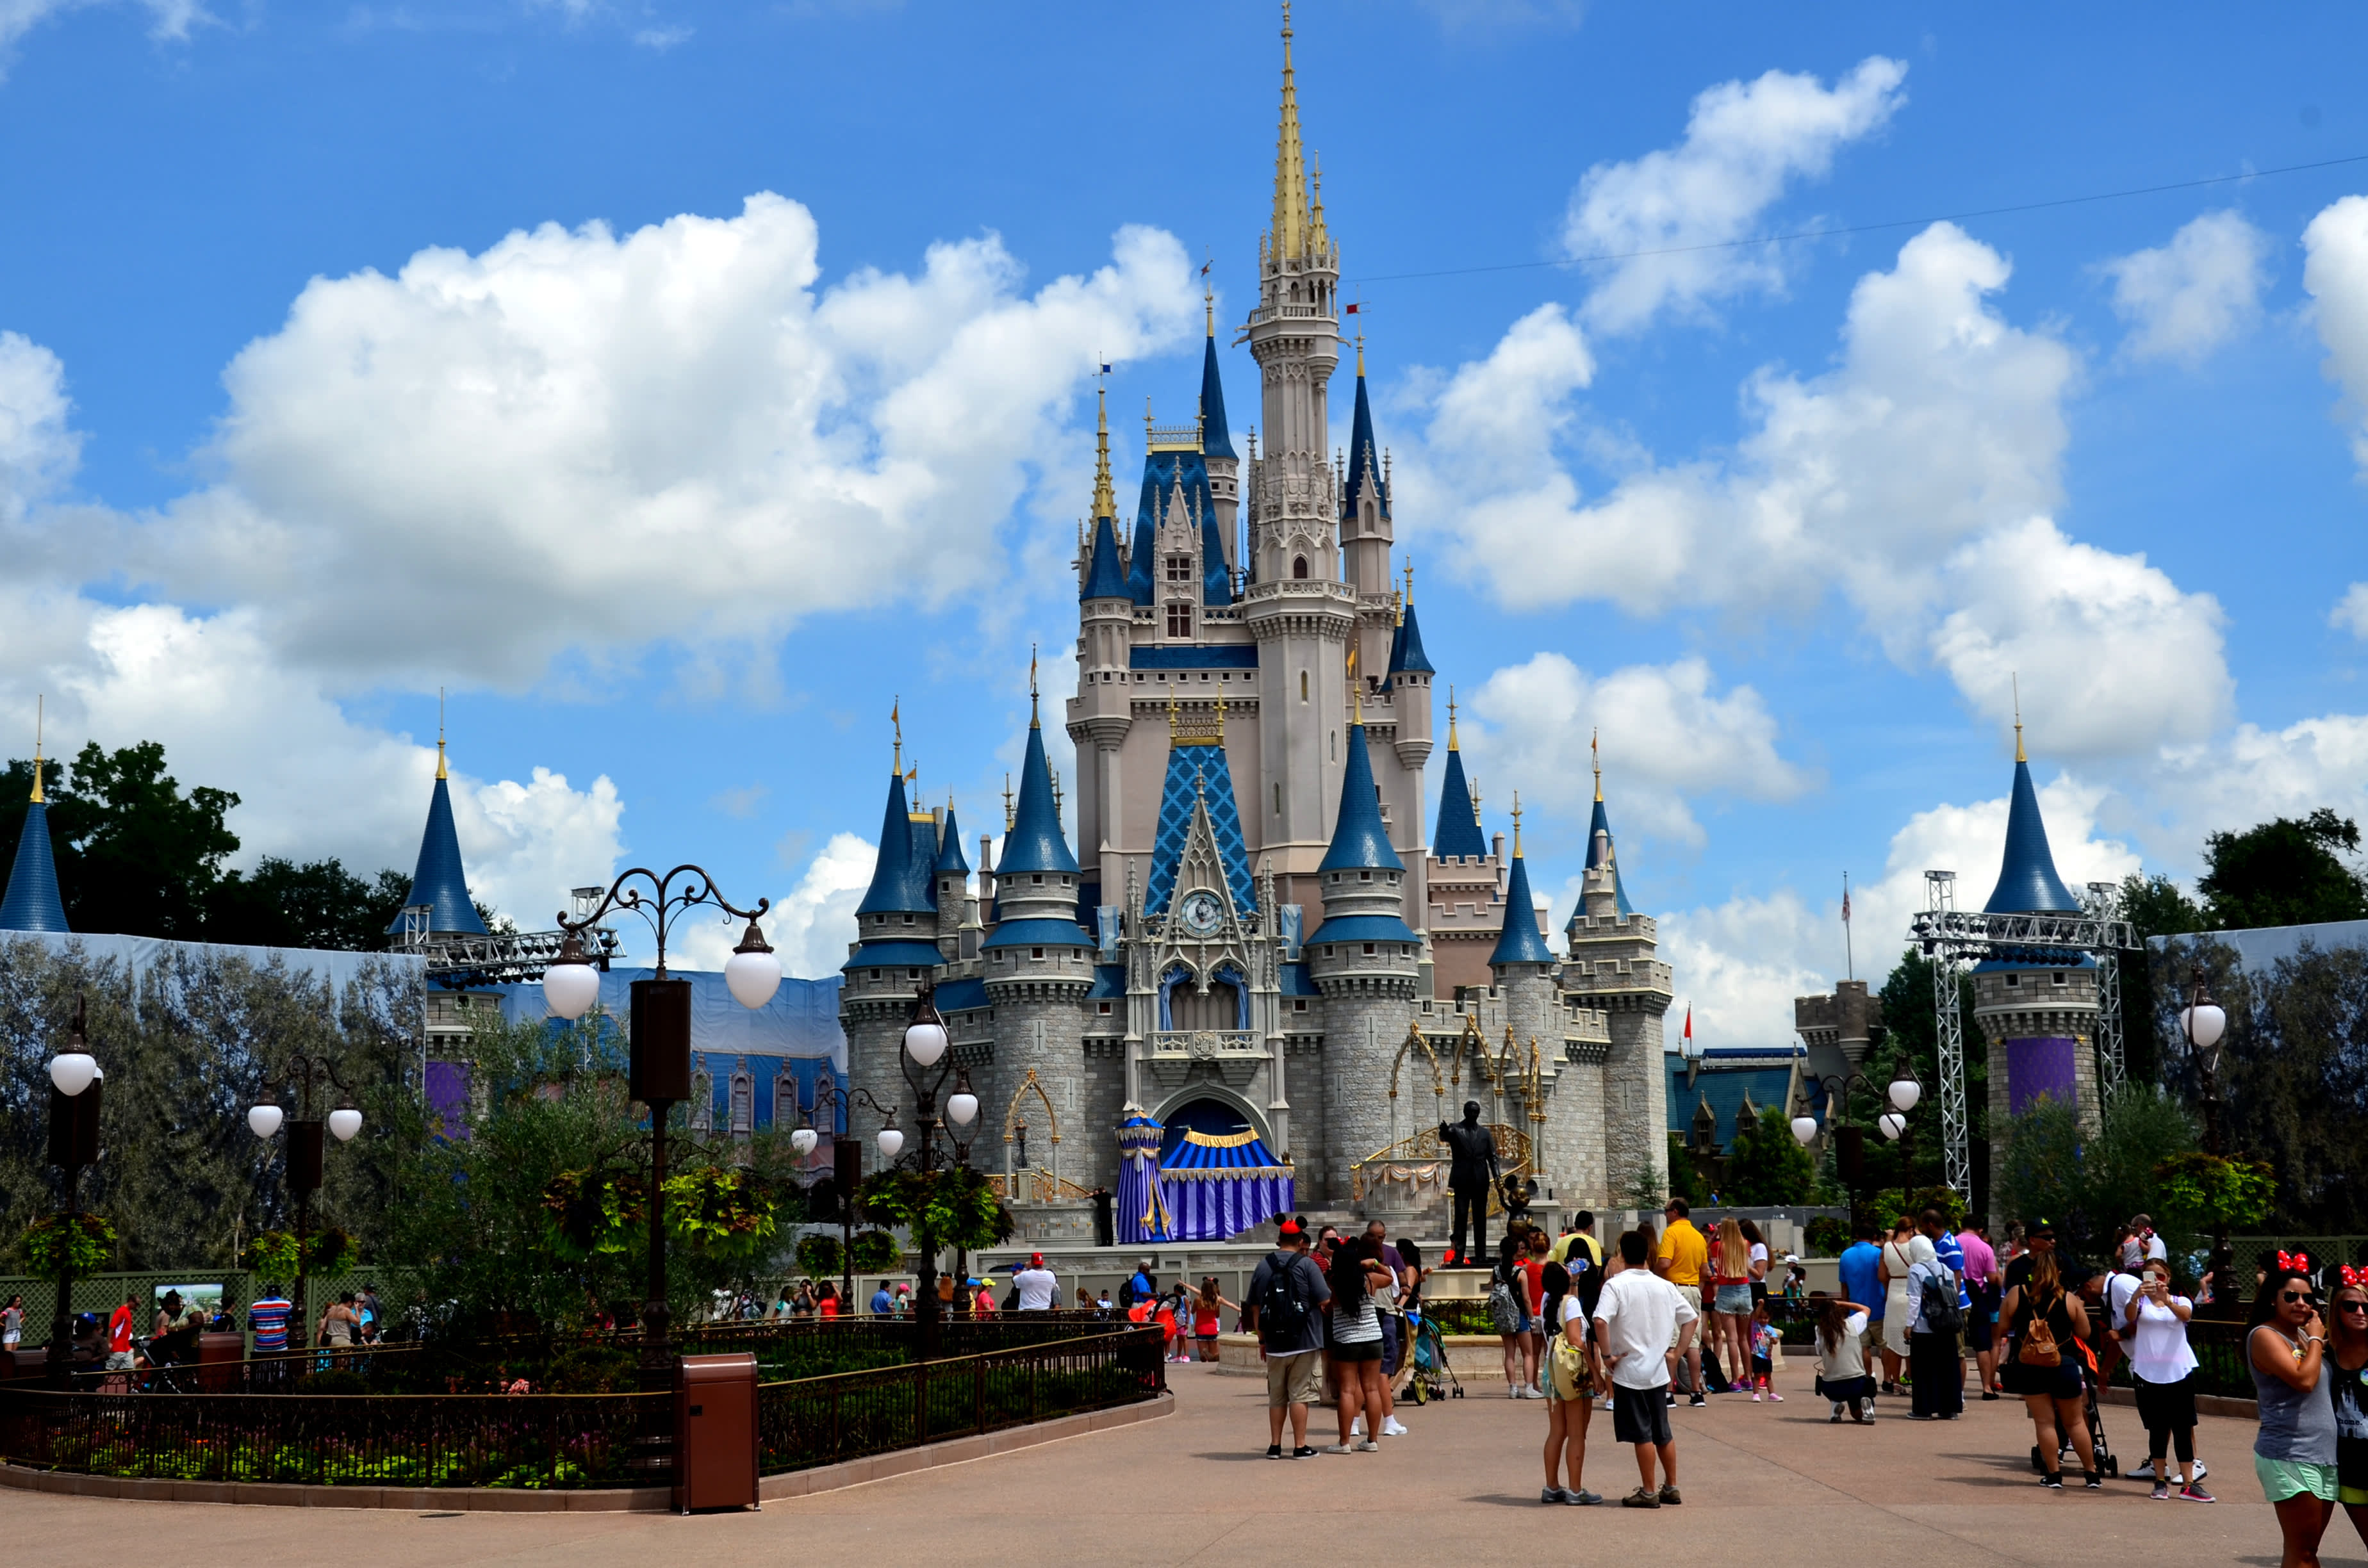 How Much A Disney World Ticket Cost The Year You Were Born